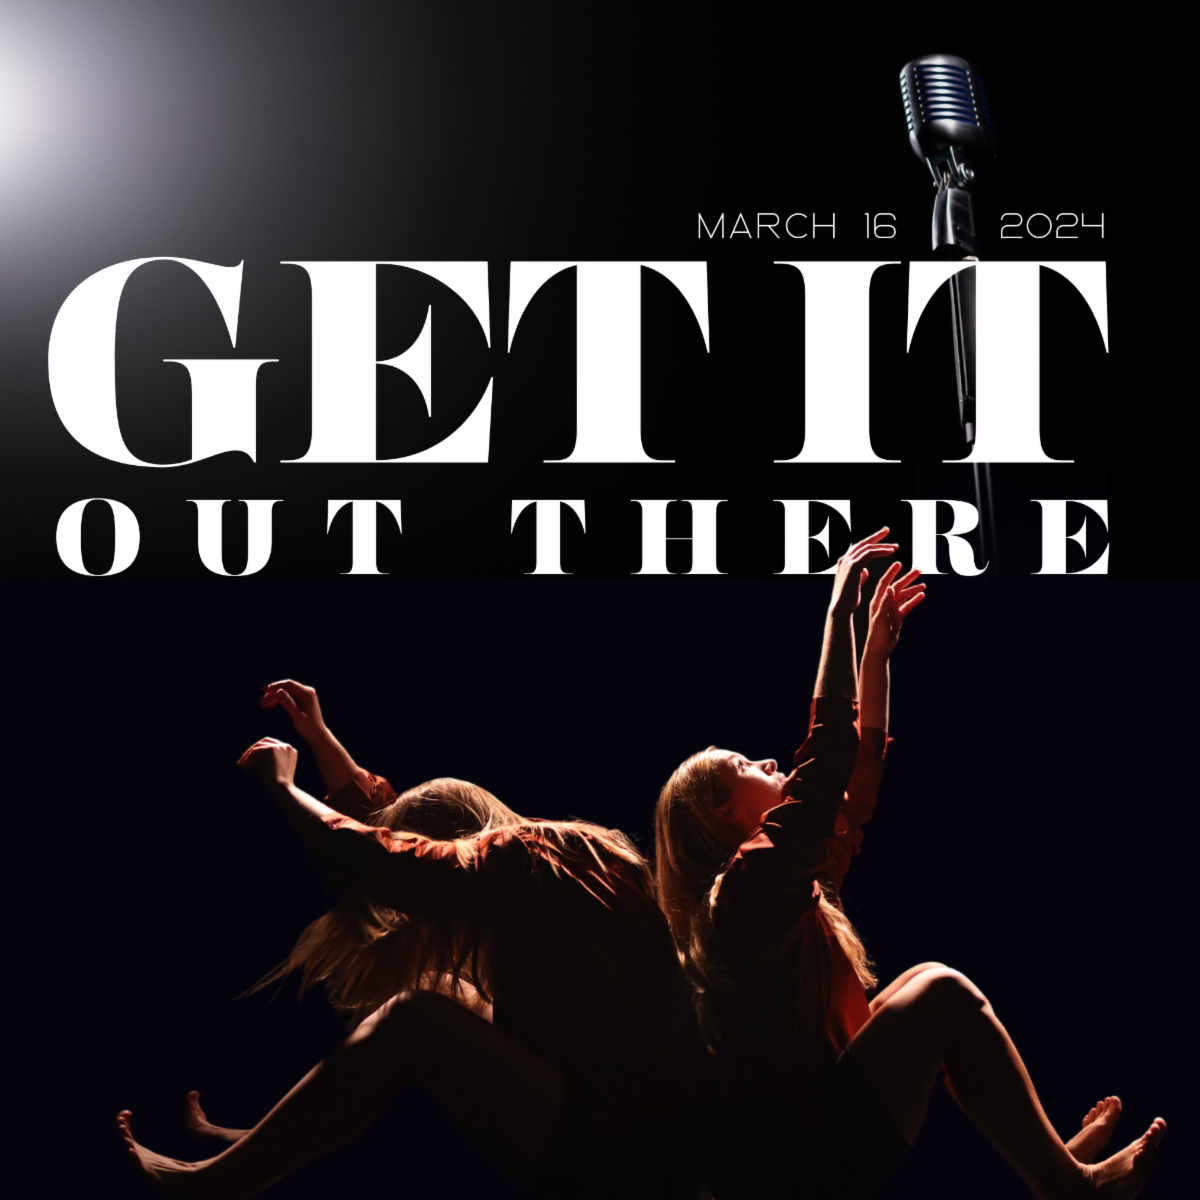 Danceworks DanceLAB Presents the Spring 2024 Installment of Get It Out There